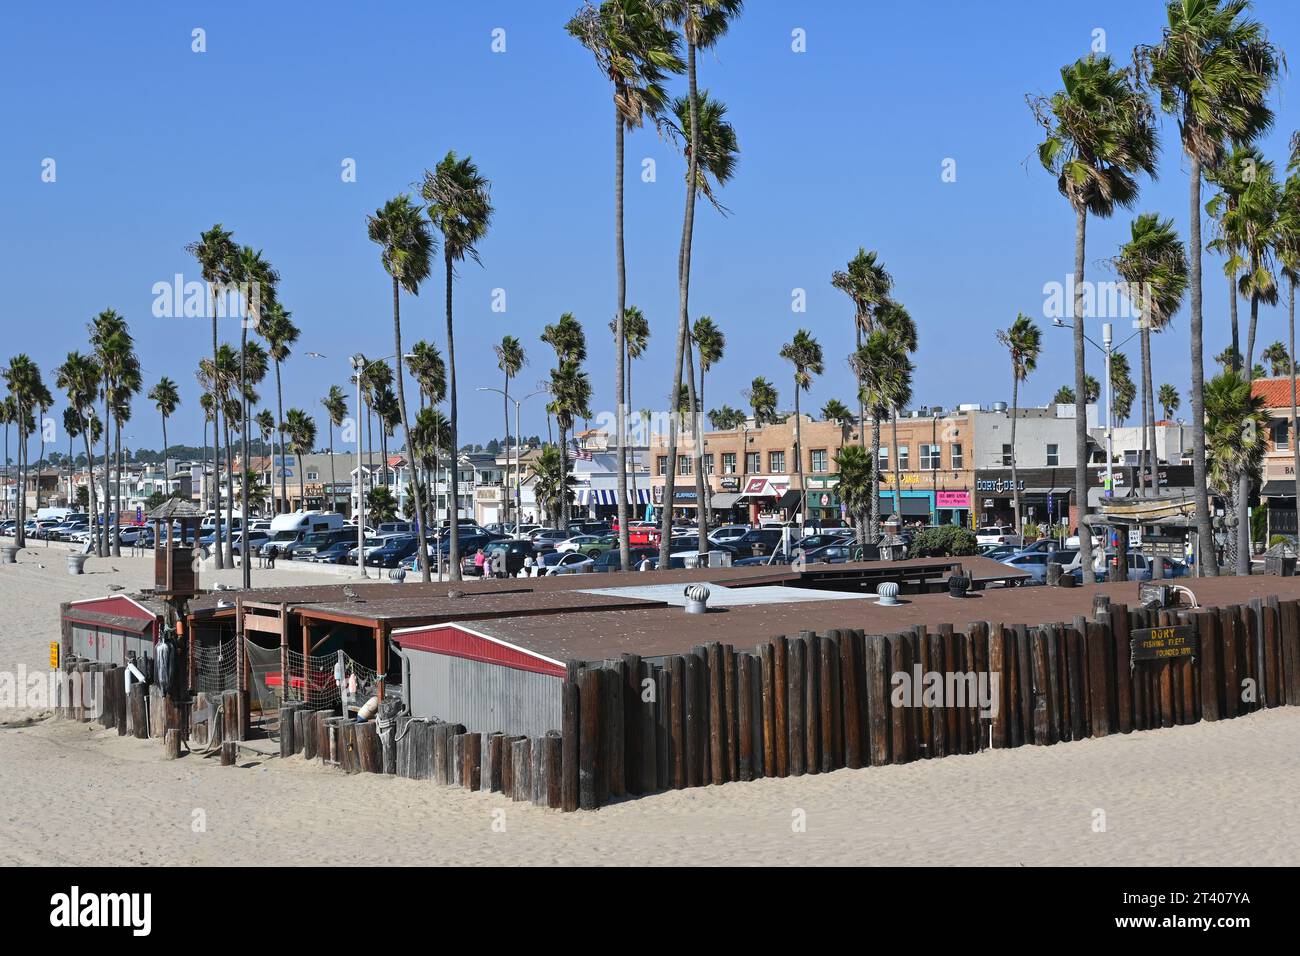 NEWPORT BEACH, CALIFORNIA - 26 OCT 2023: The Dory Fishing Fleet and Market is a beachside fishing cooperative at the pier founded in 1891. Stock Photo